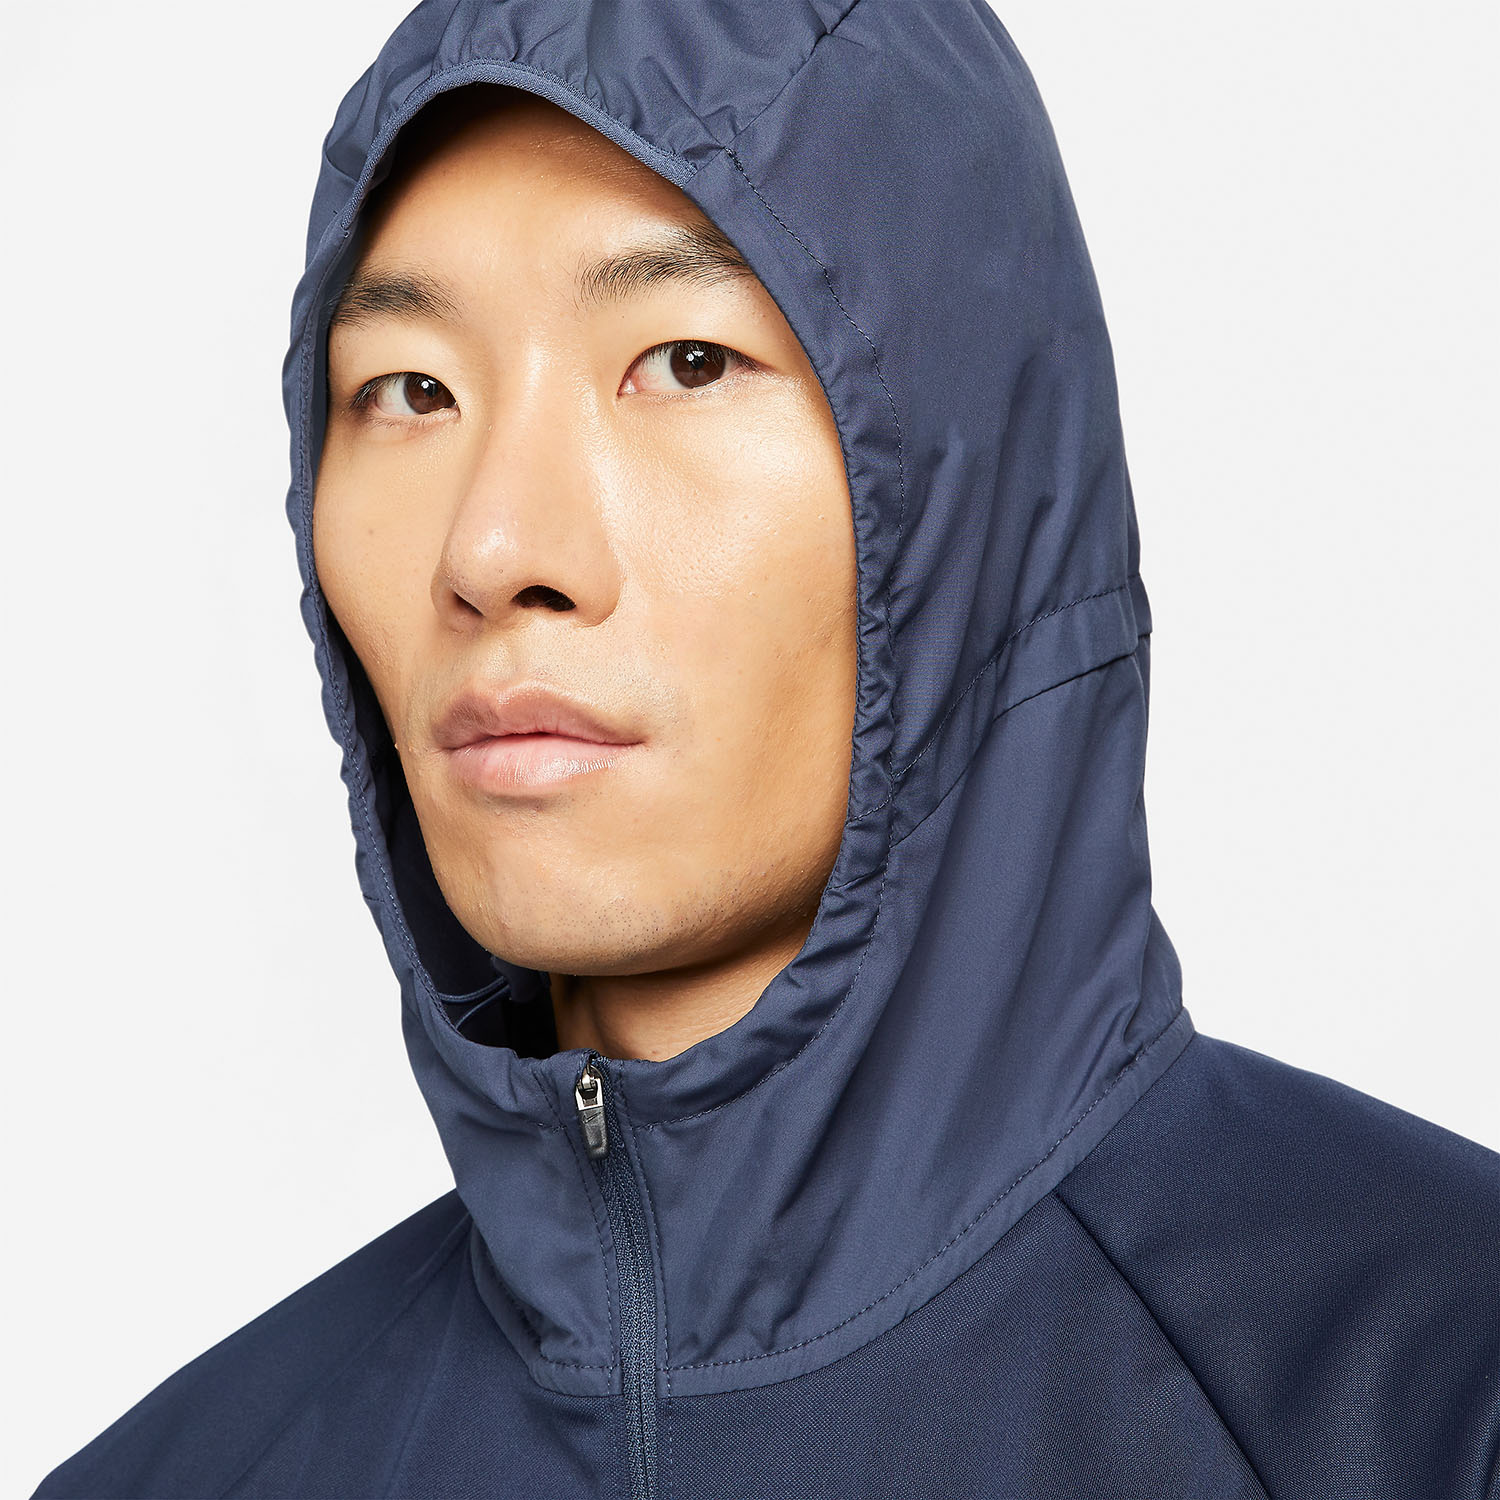 Nike Therma-FIT Repel Miler Jacket - Obsidian/Thunder Blue/Reflective Silver